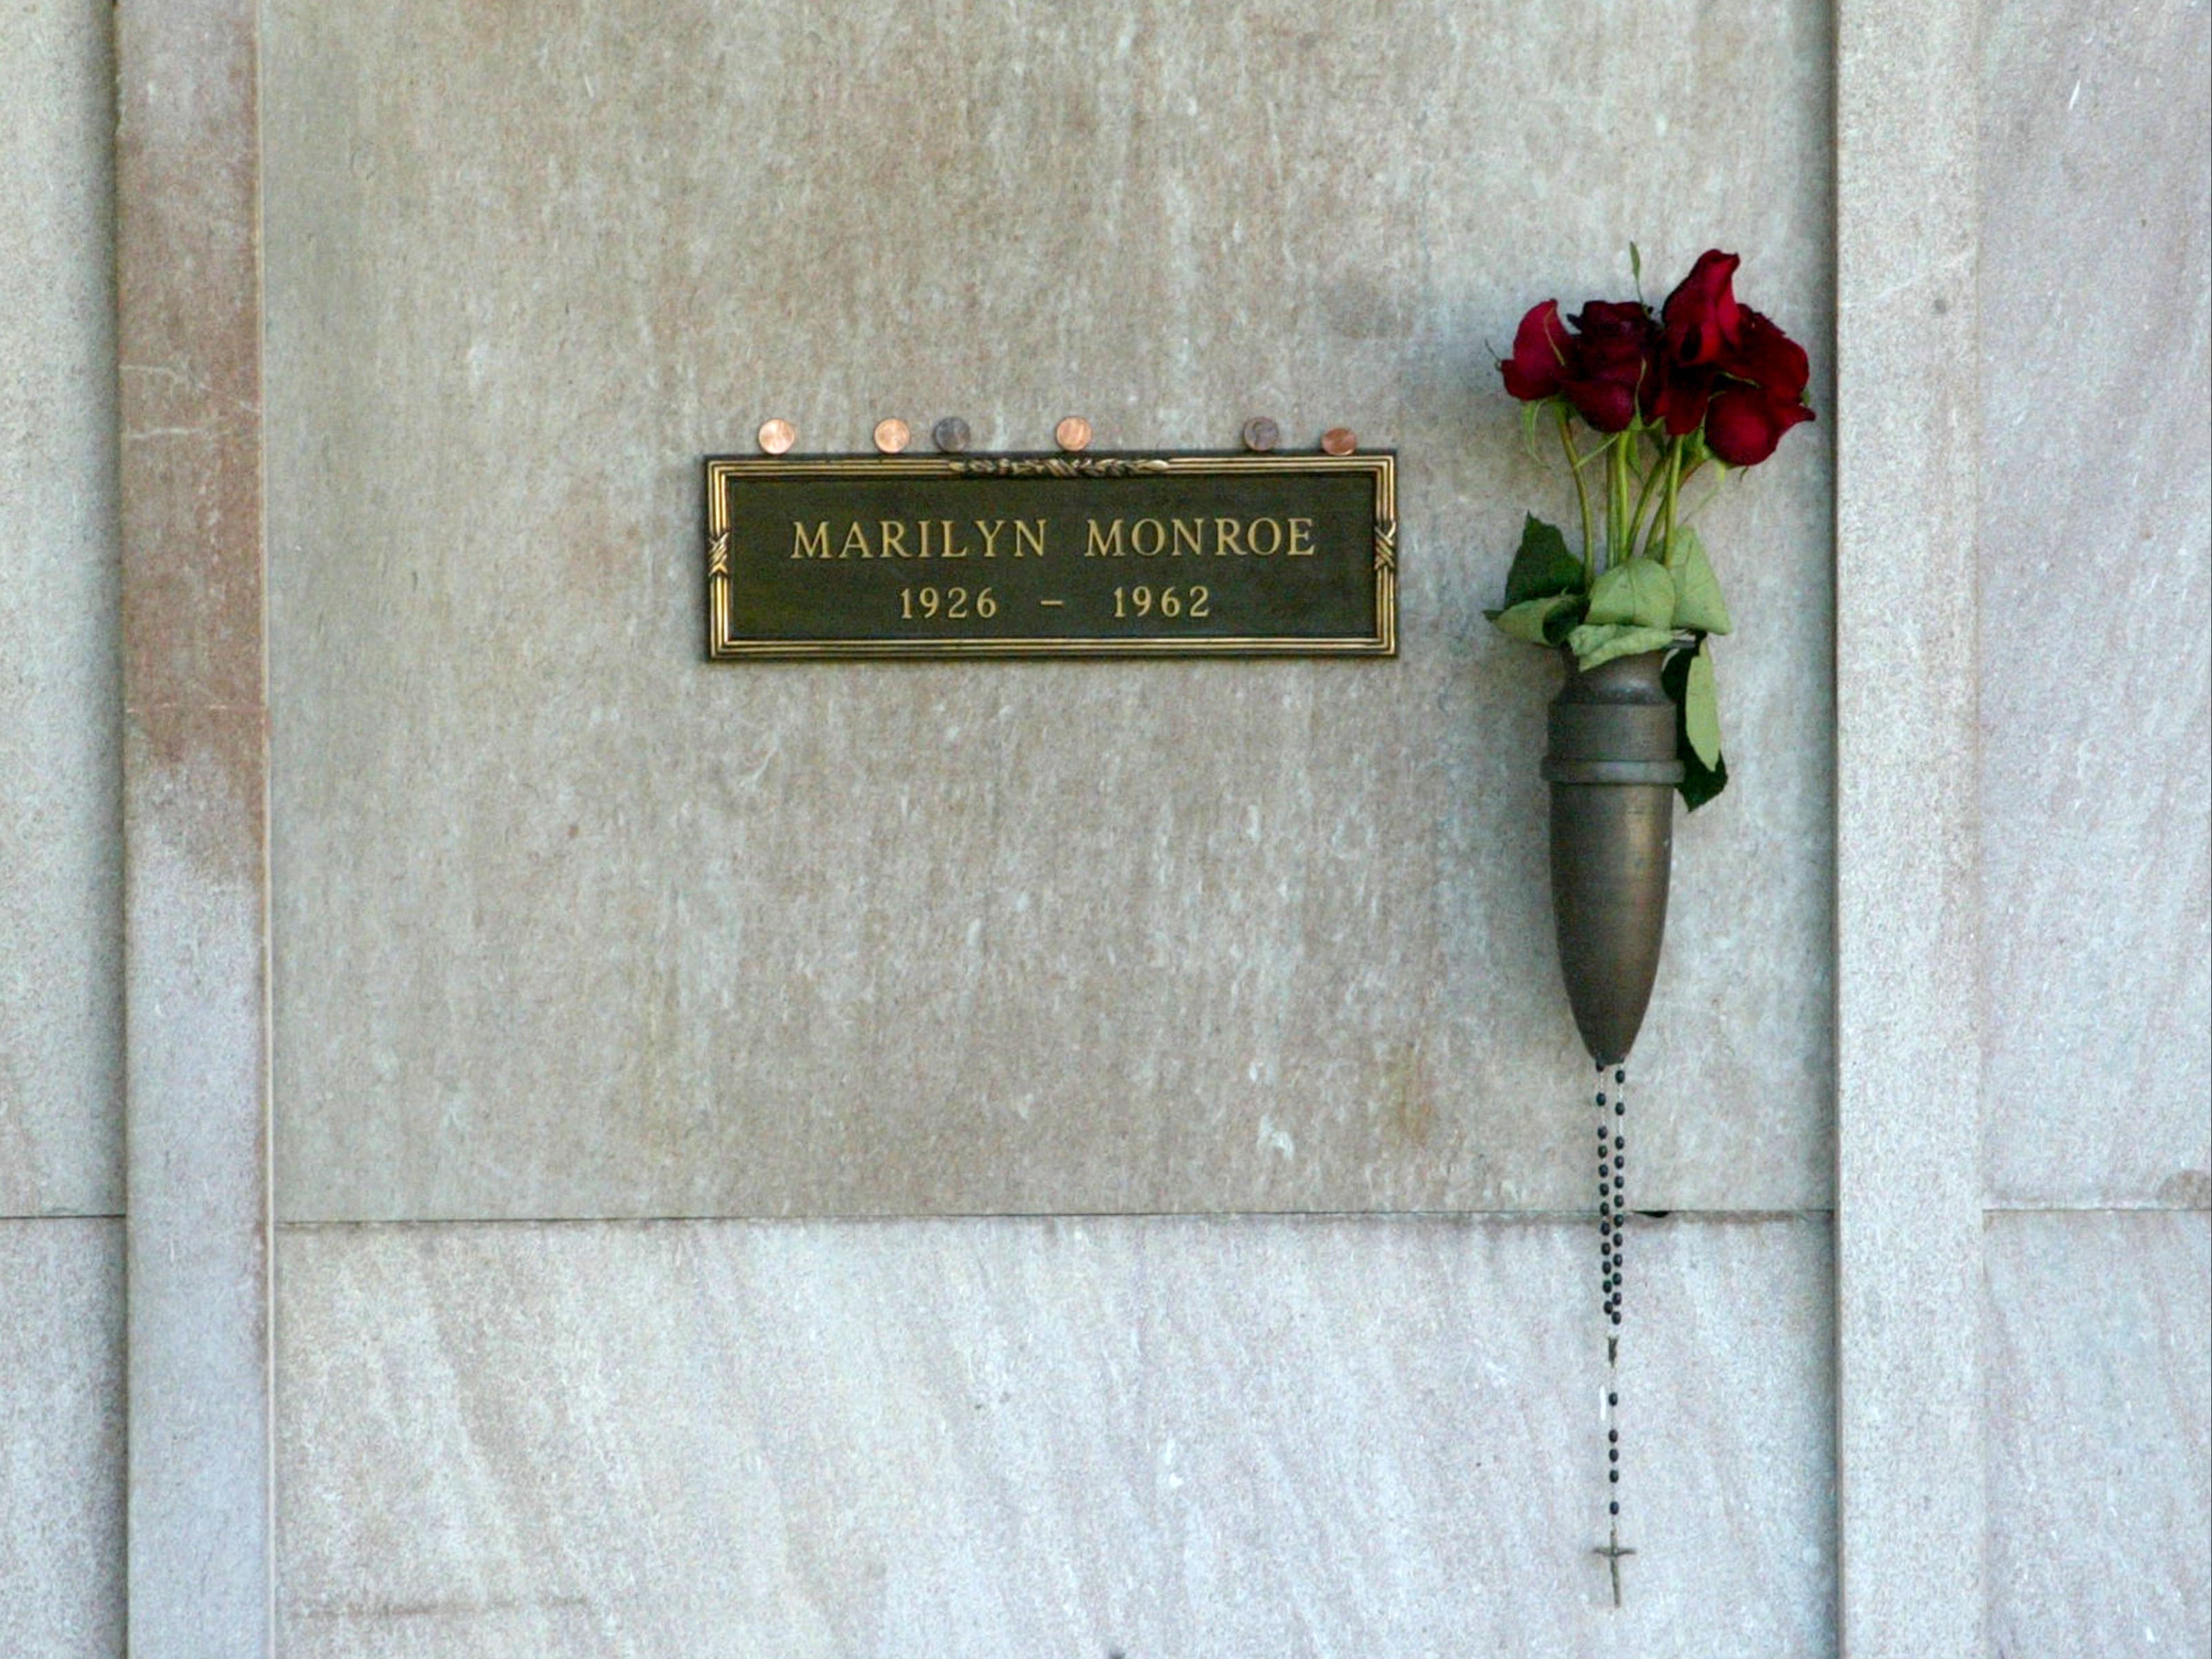 The grave site of late actress Marilyn Monroe. Playboy founder Hugh Hefner later purchased the crypt adjacent.